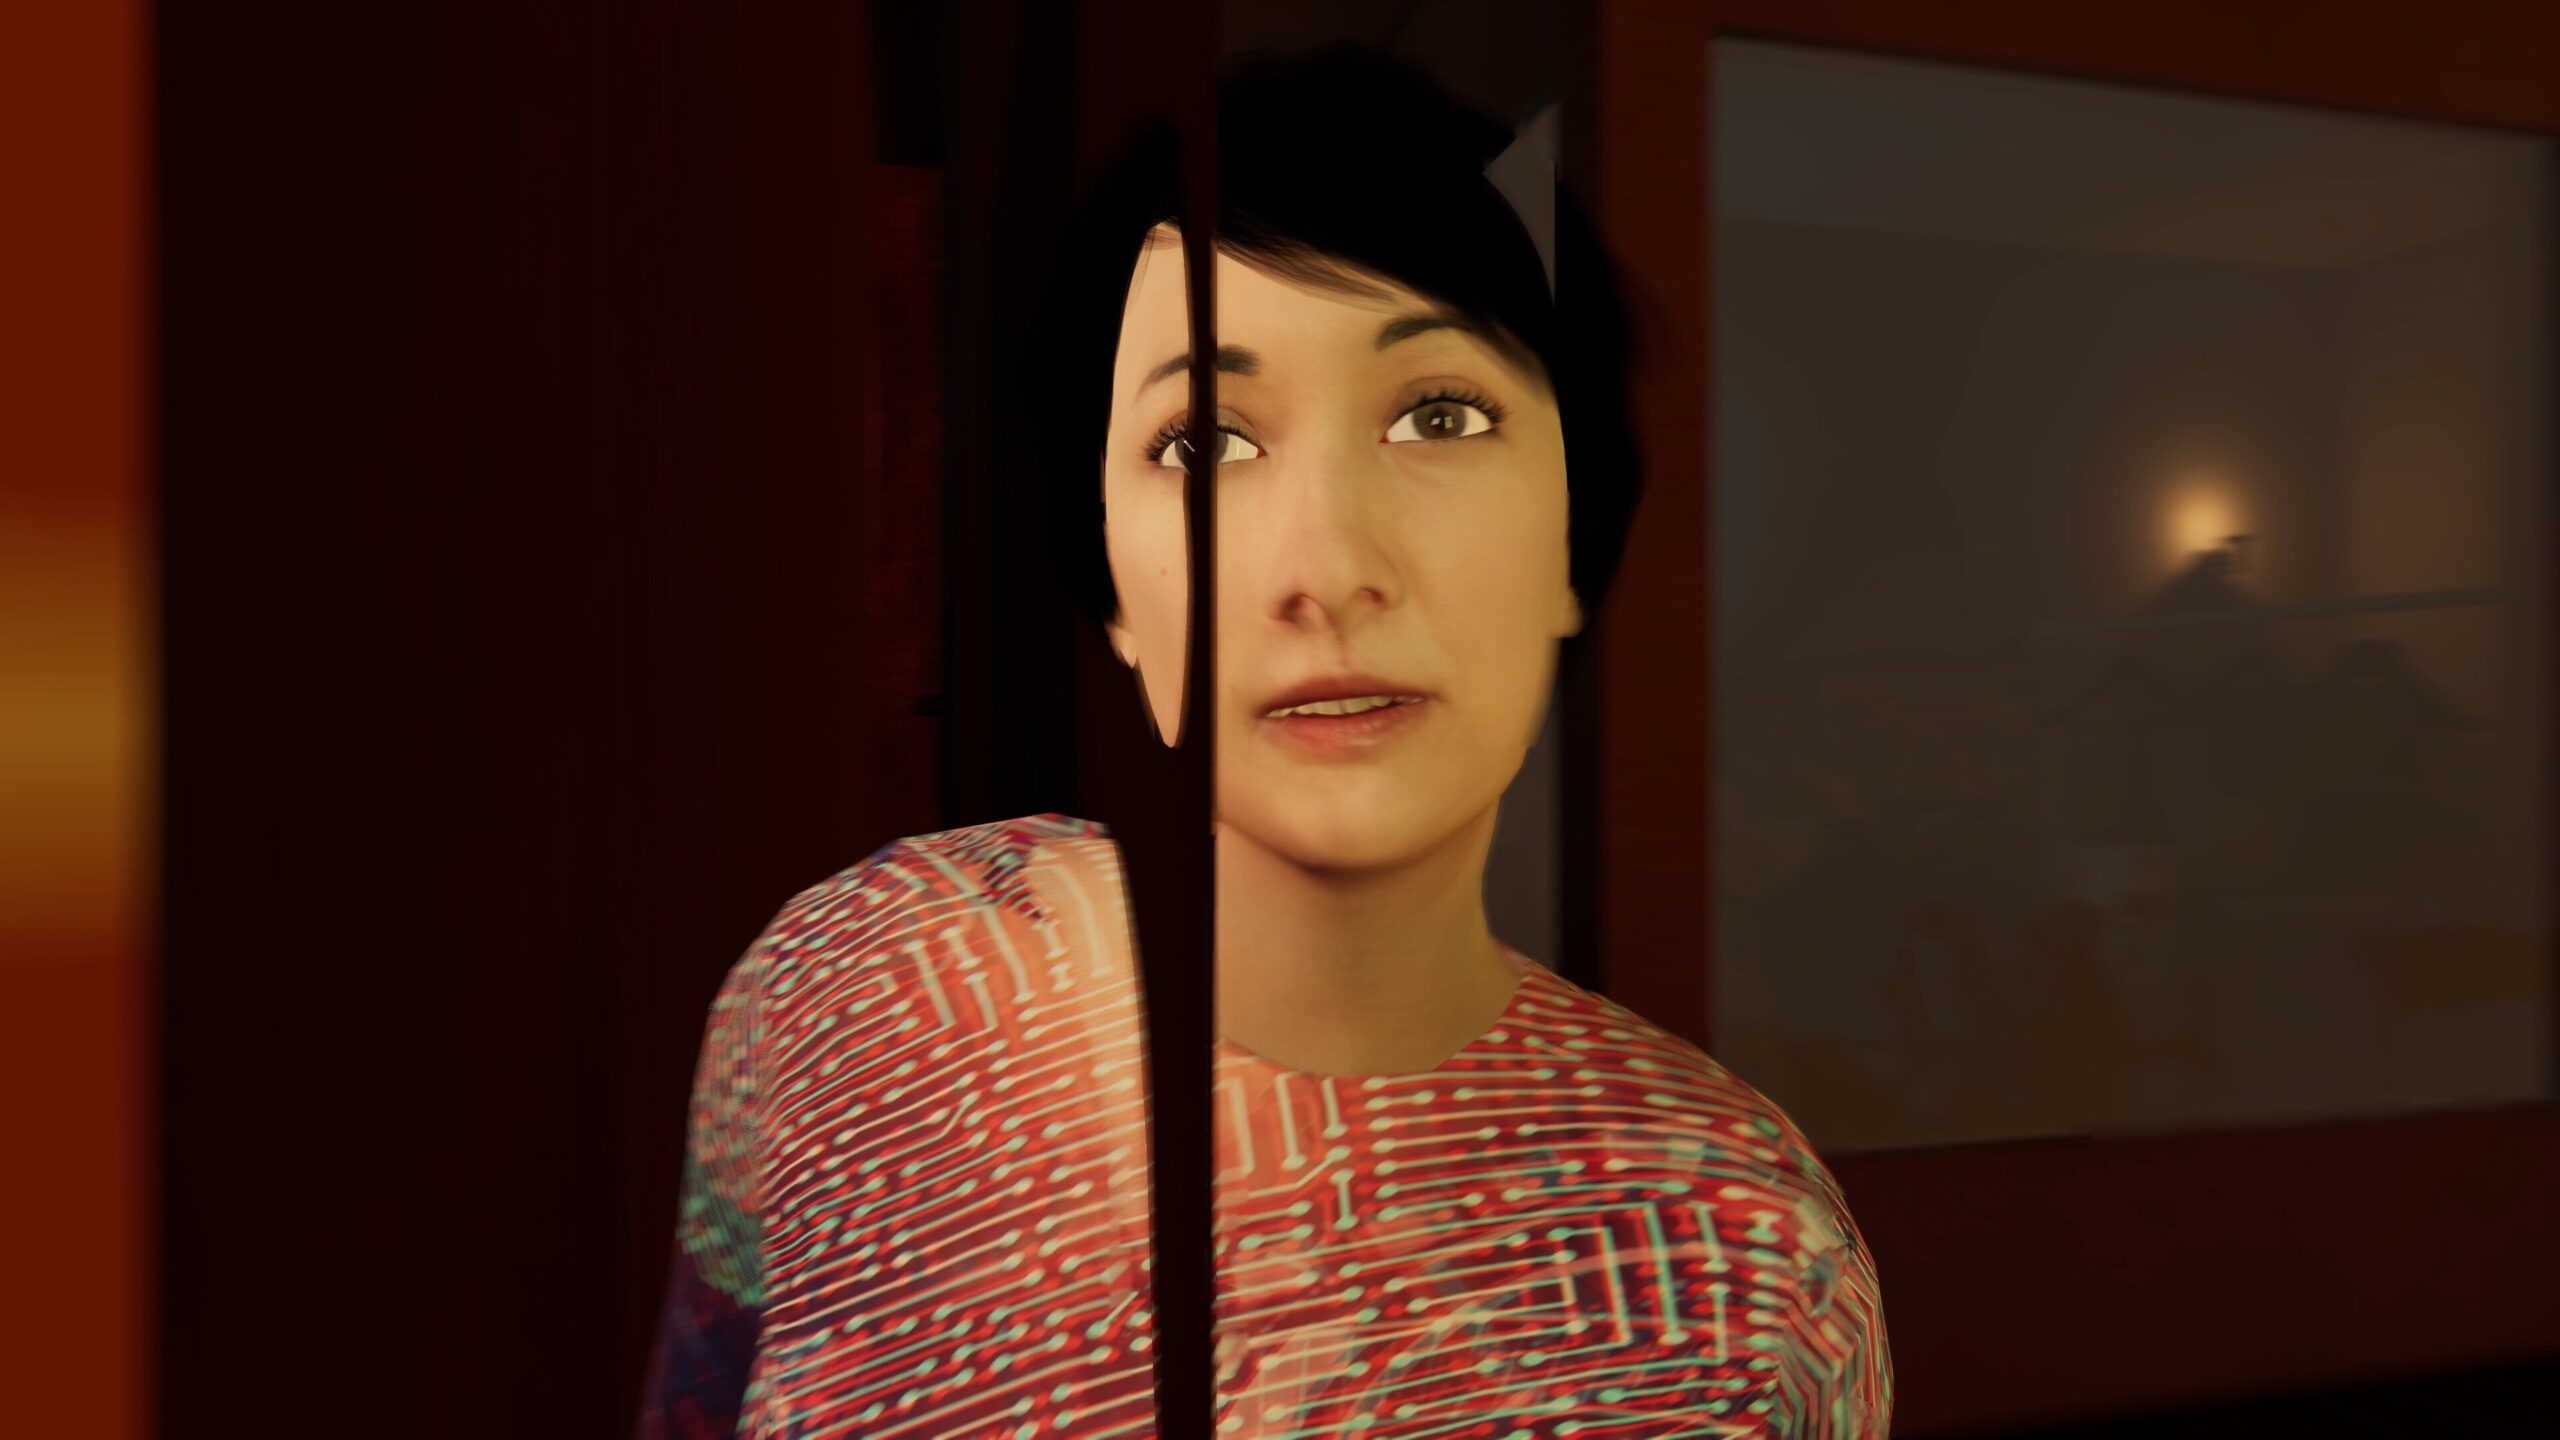 Animated image of a woman with short, black hair looking towards the viewer against a dark backdrop.